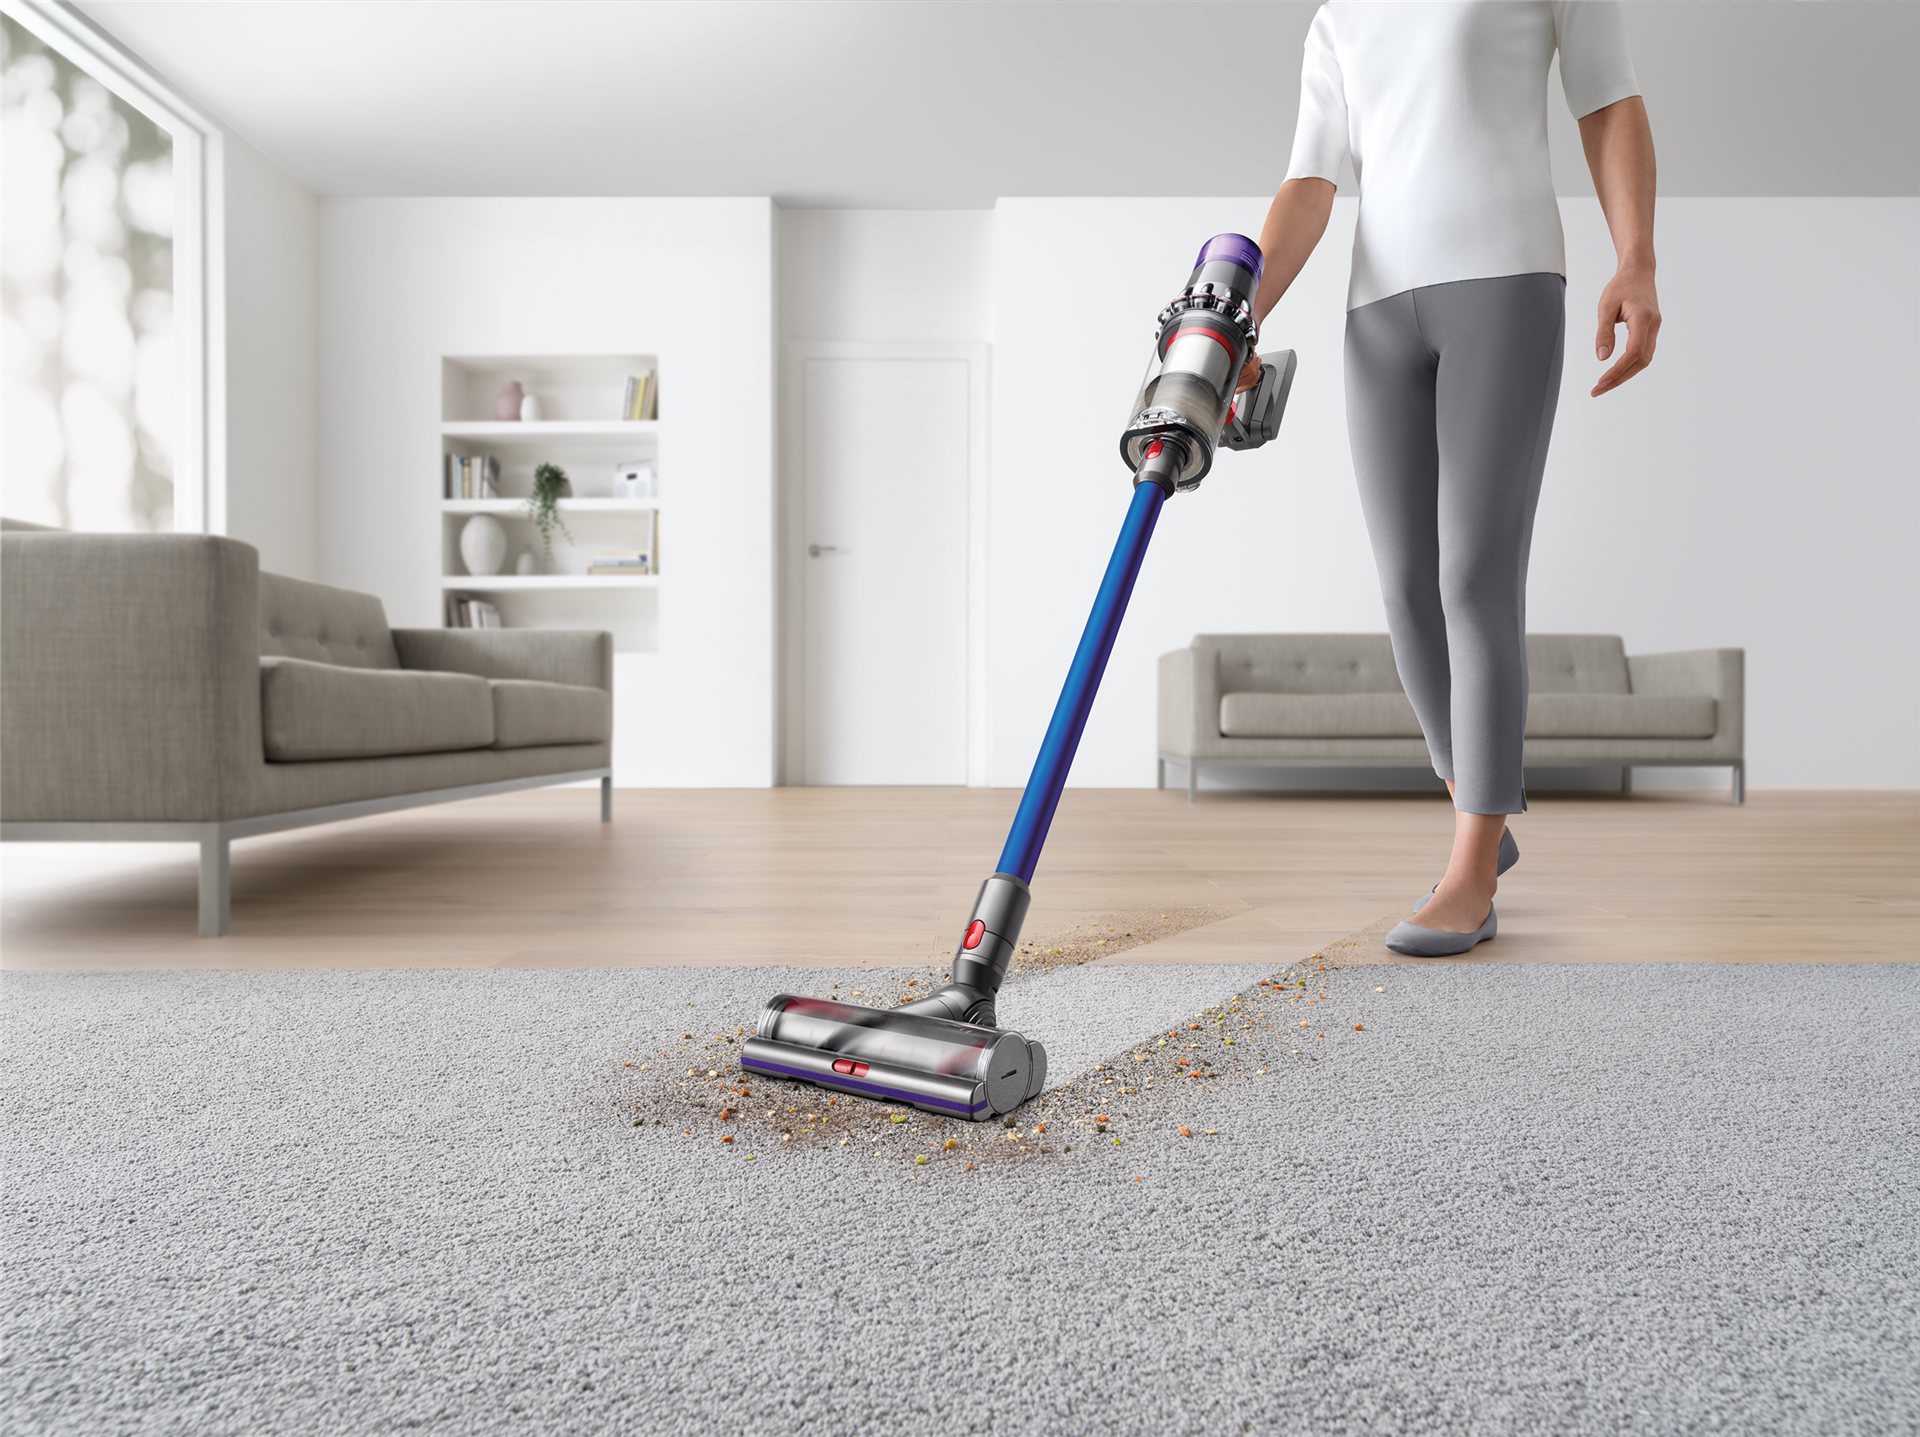 Have a bigger home to vacuum? Dyson's got you covered